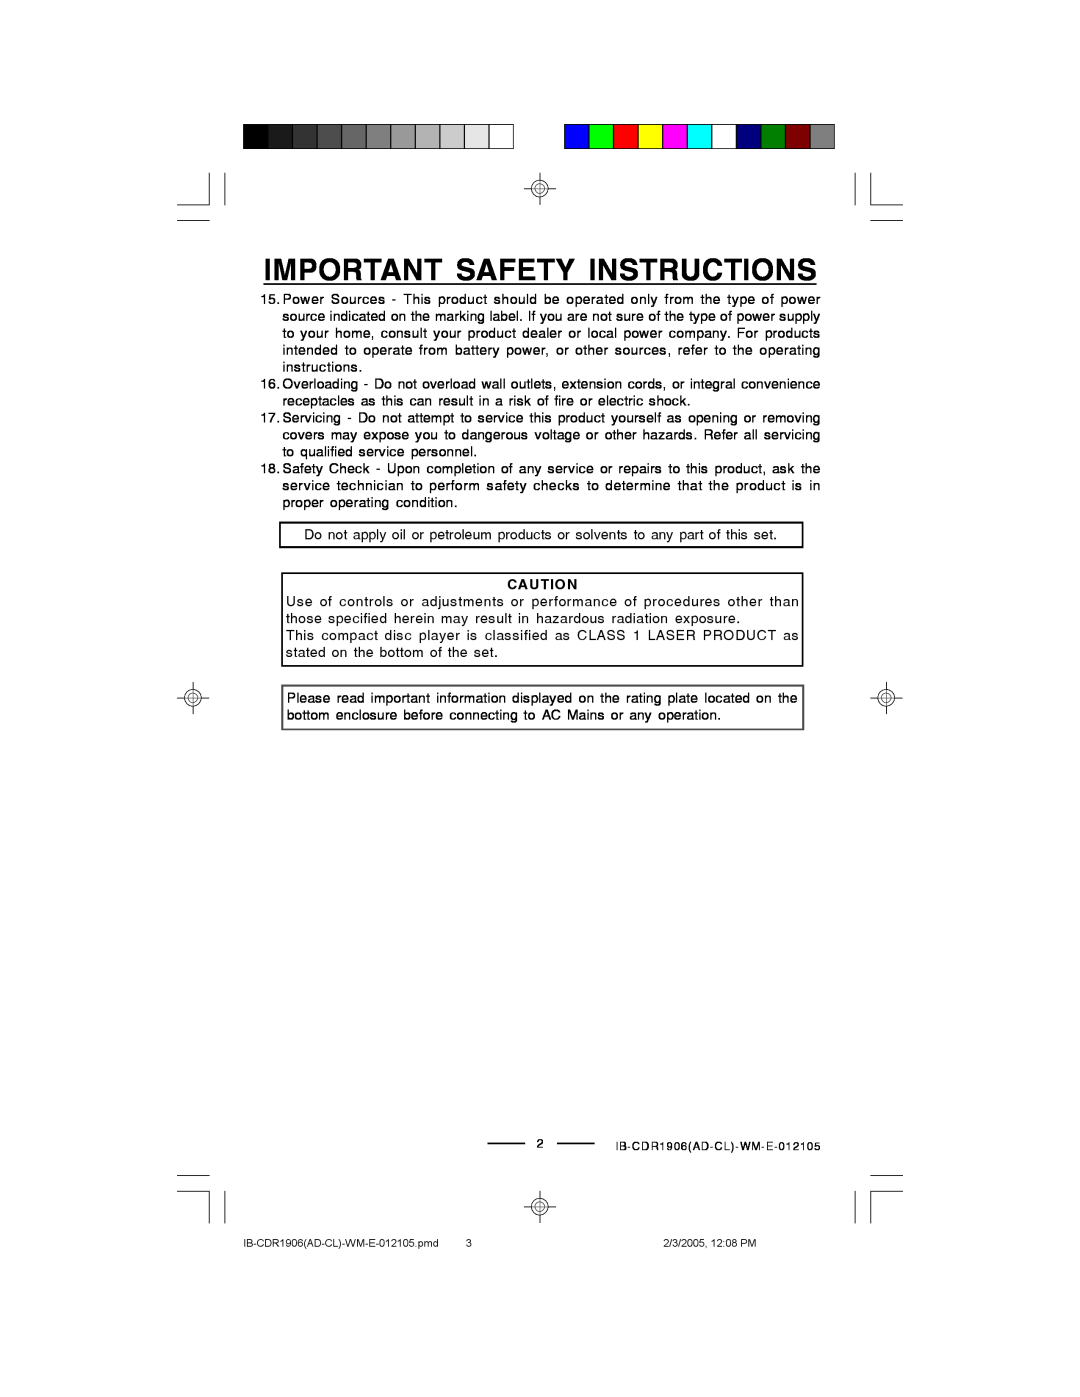 Lenoxx Electronics manual Important Safety Instructions, 2IB-CDR1906AD-CL-WM-E-012105, IB-CDR1906AD-CL-WM-E-012105.pmd 